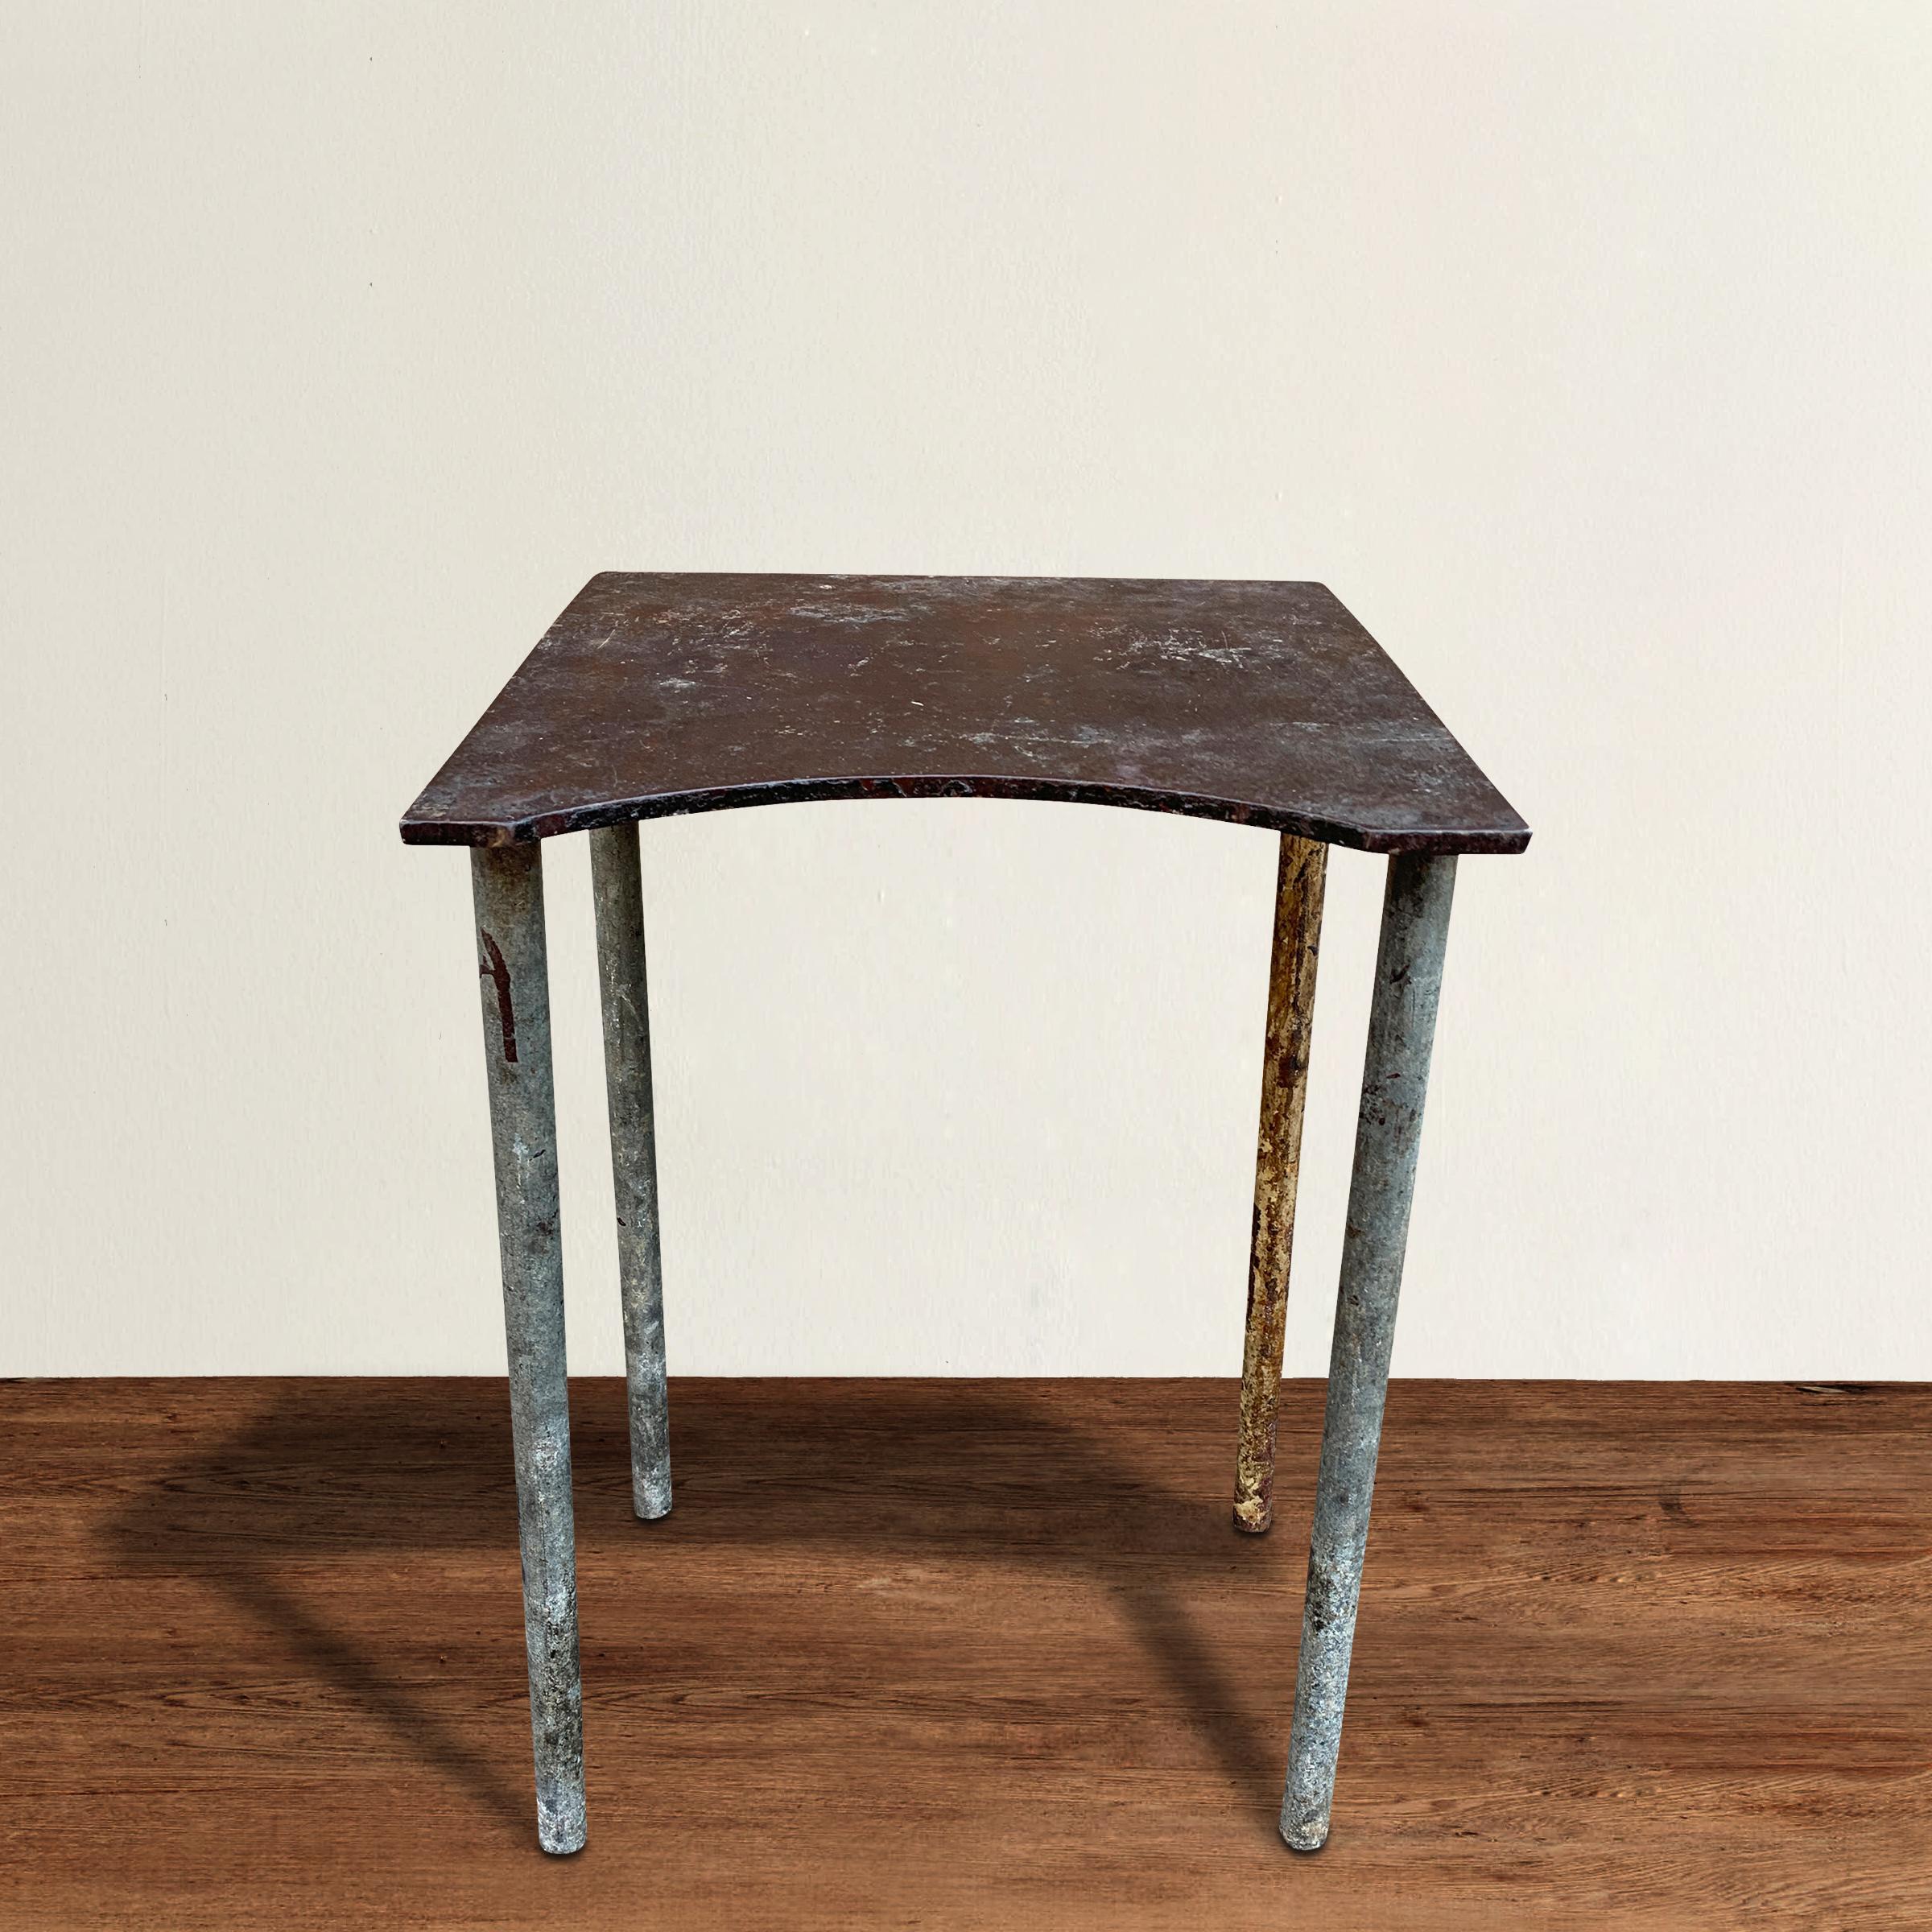 An honest and stoic mid-20th century American industrial steel table or stool with a put form including round legs supporting a mostly square top with one side having a half moon cut out. Works wonderfully as a drinks table next to your favorite